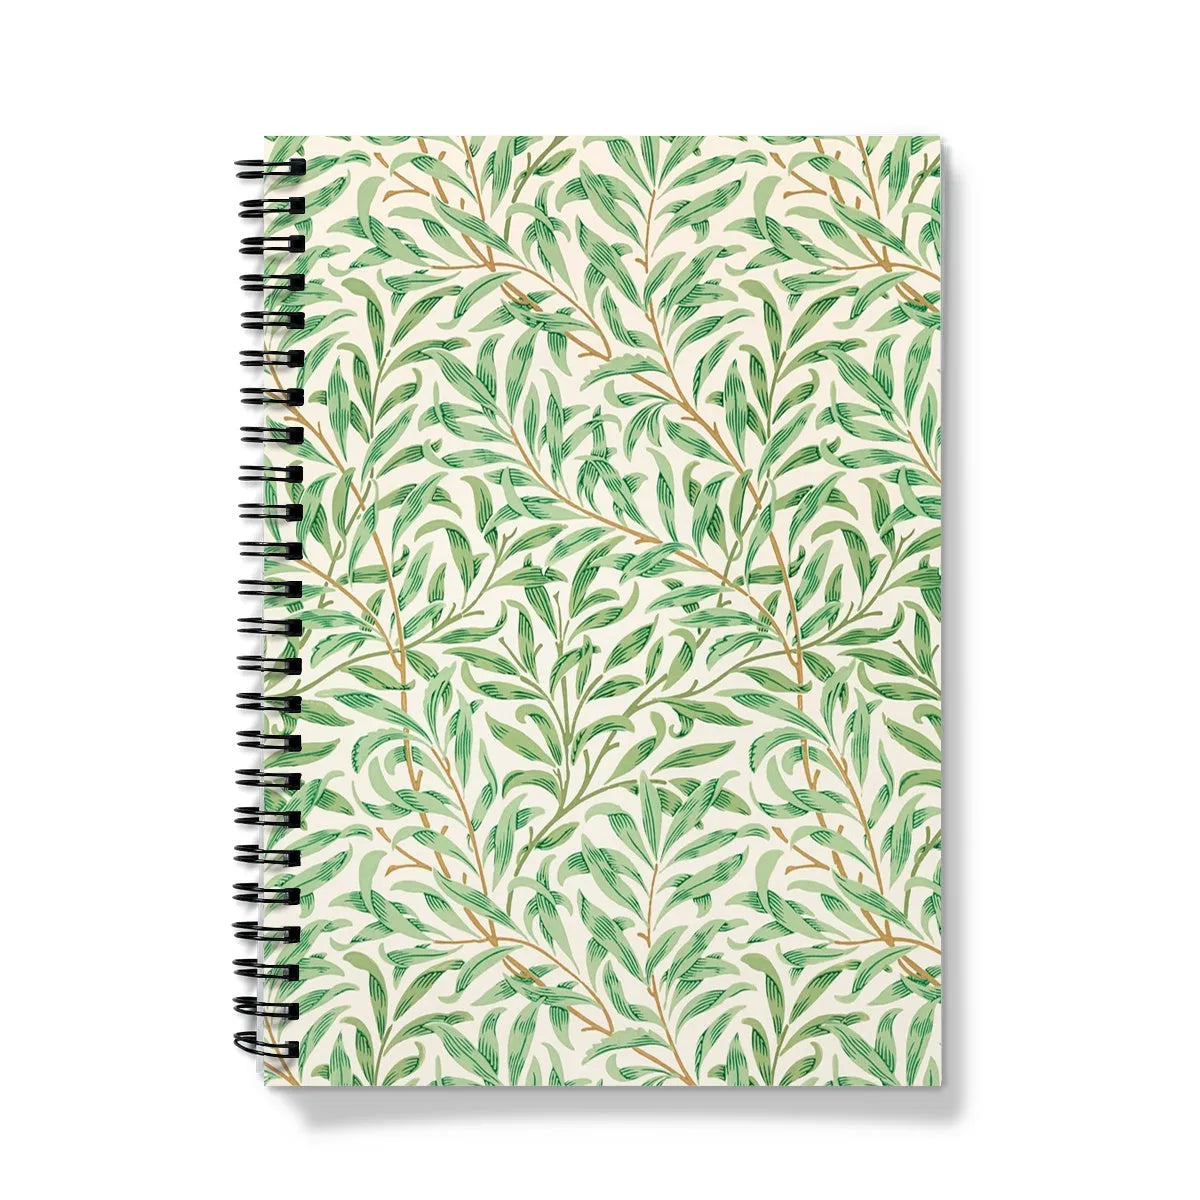 Willow Bough By William Morris Notebook - A5 / Graph - Notebooks & Notepads - Aesthetic Art